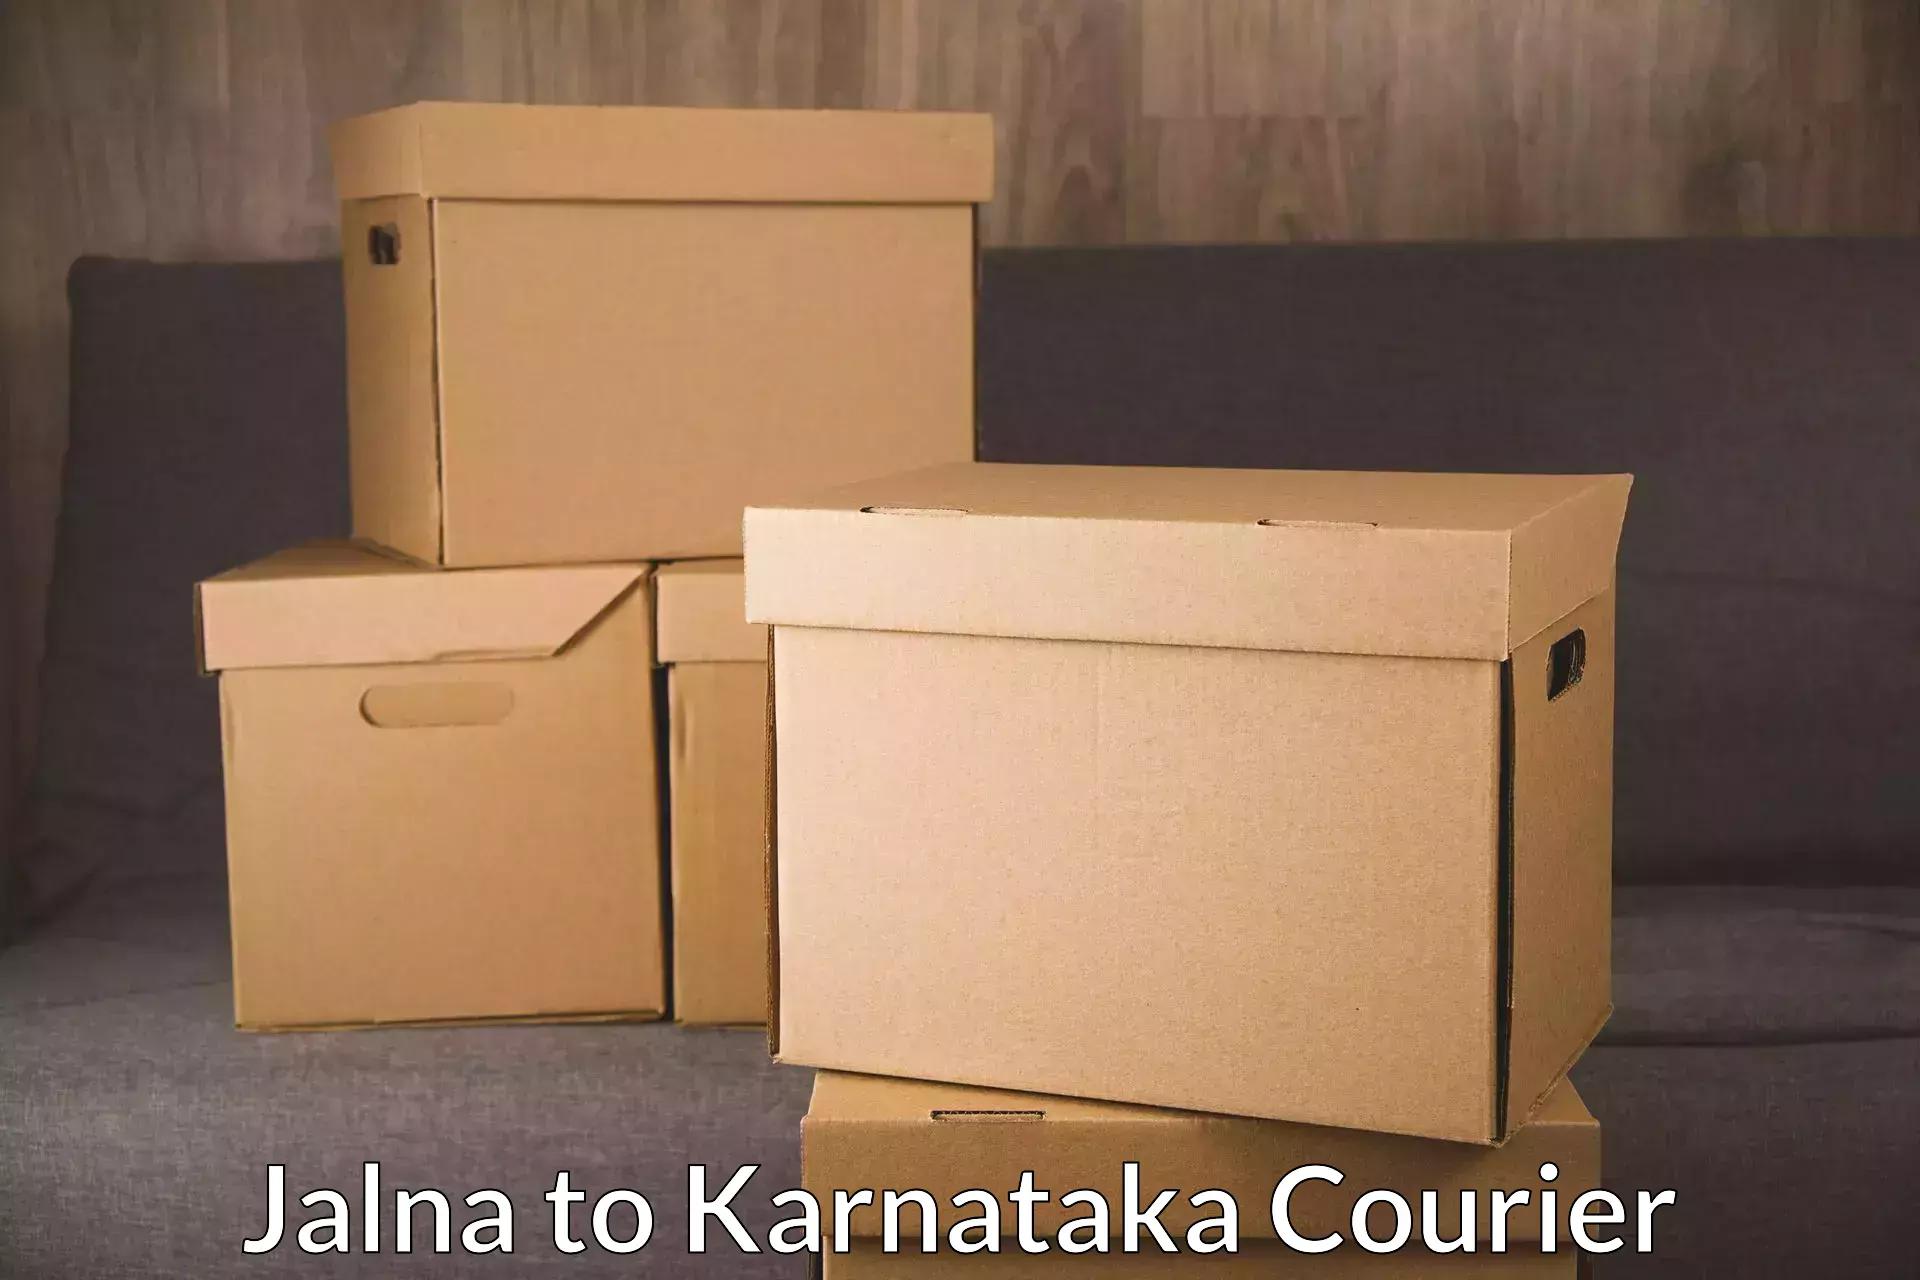 Courier service partnerships Jalna to Yellare